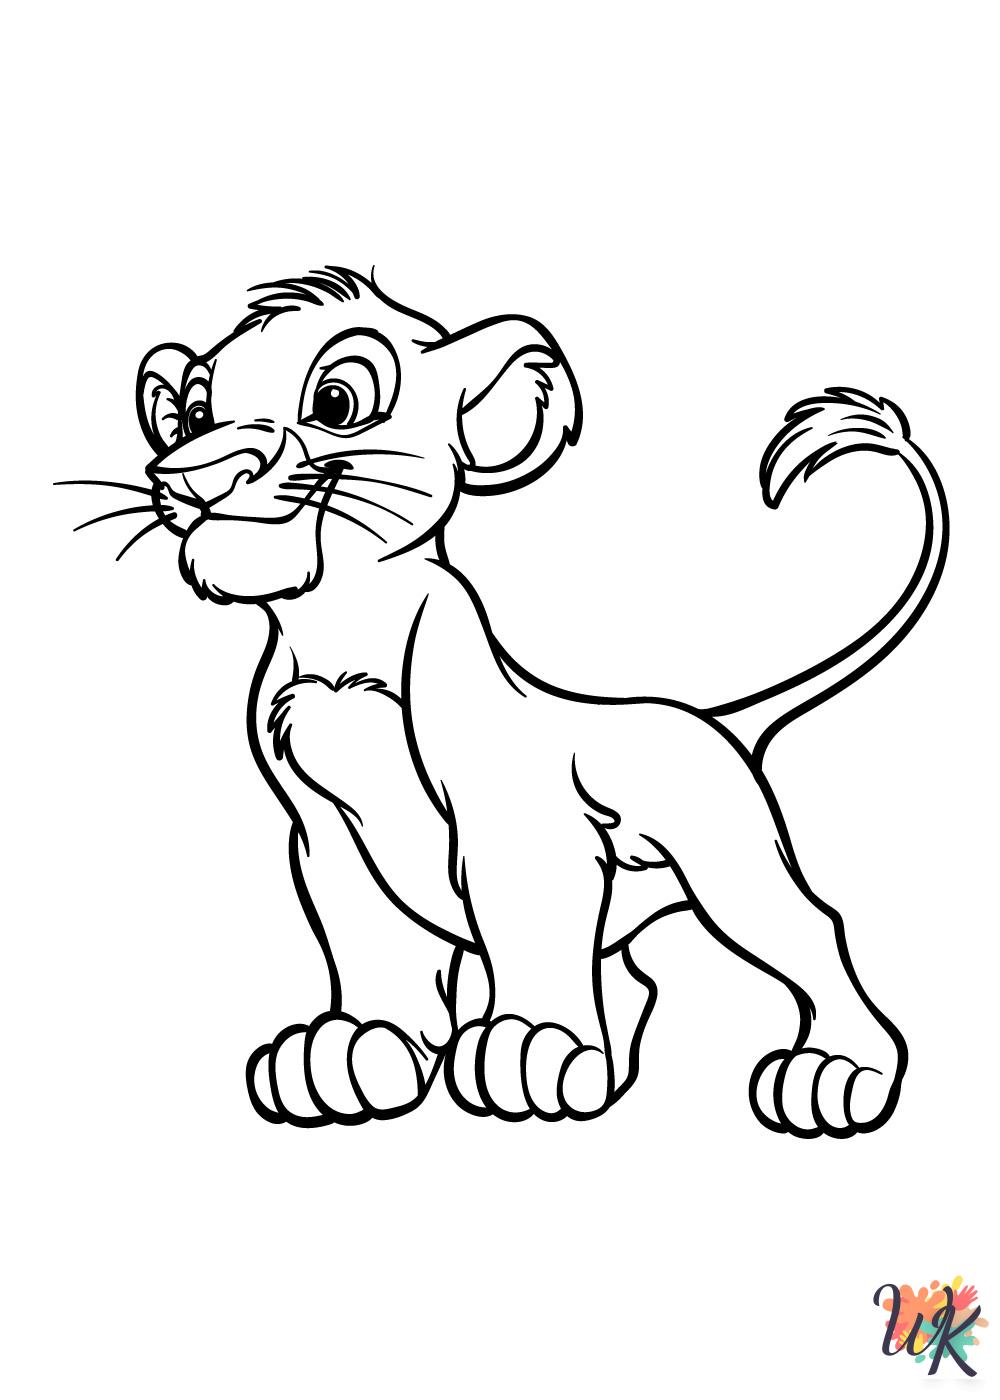 Lion King coloring pages printable free